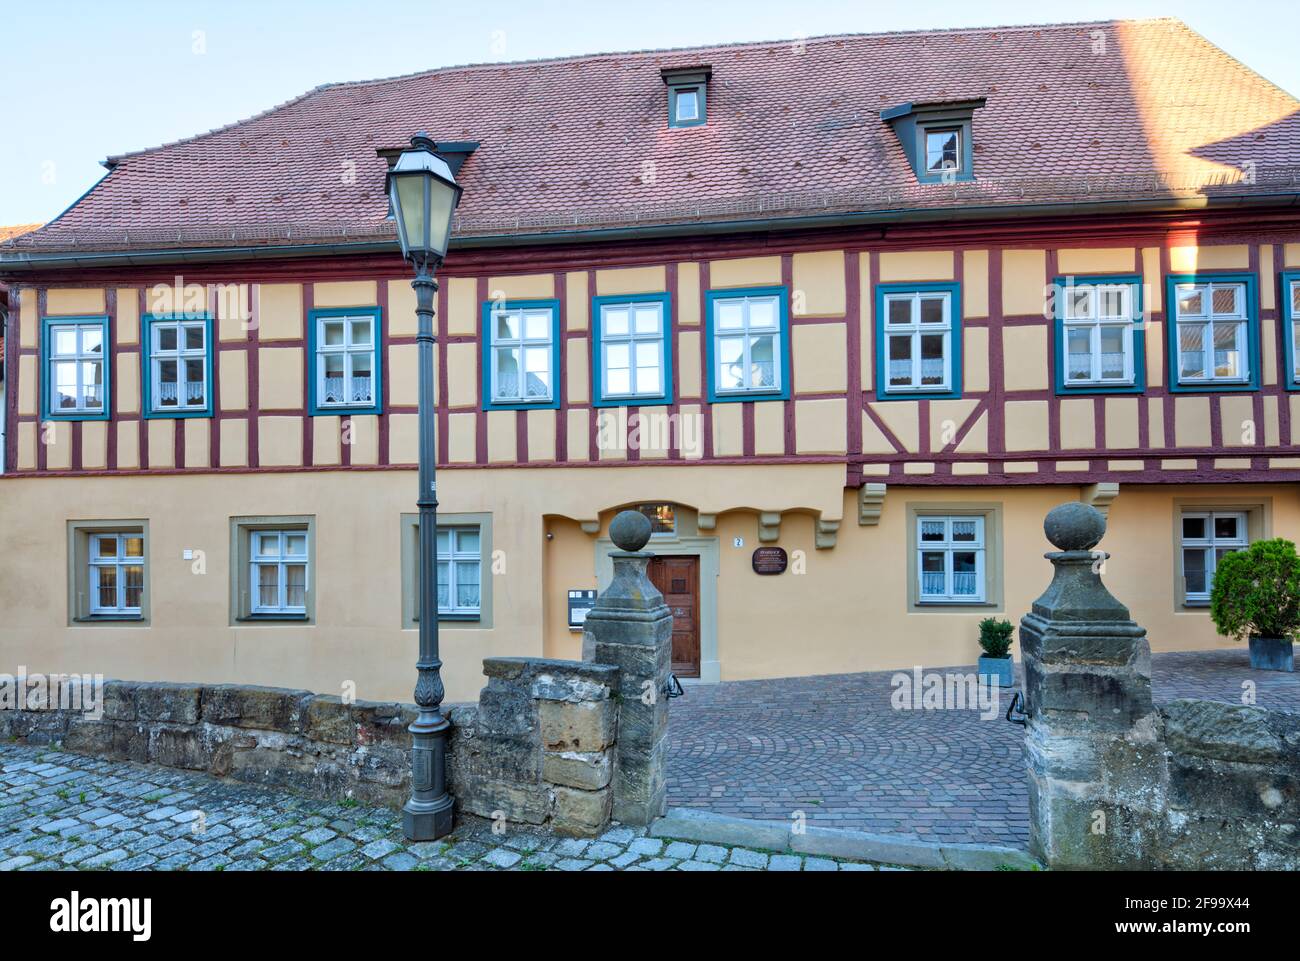 Rectory, rectory, house facade, facade, half-timbered, architecture, old, Haßberge, Ebern, Franconia, Bavaria, Germany, Europe Stock Photo